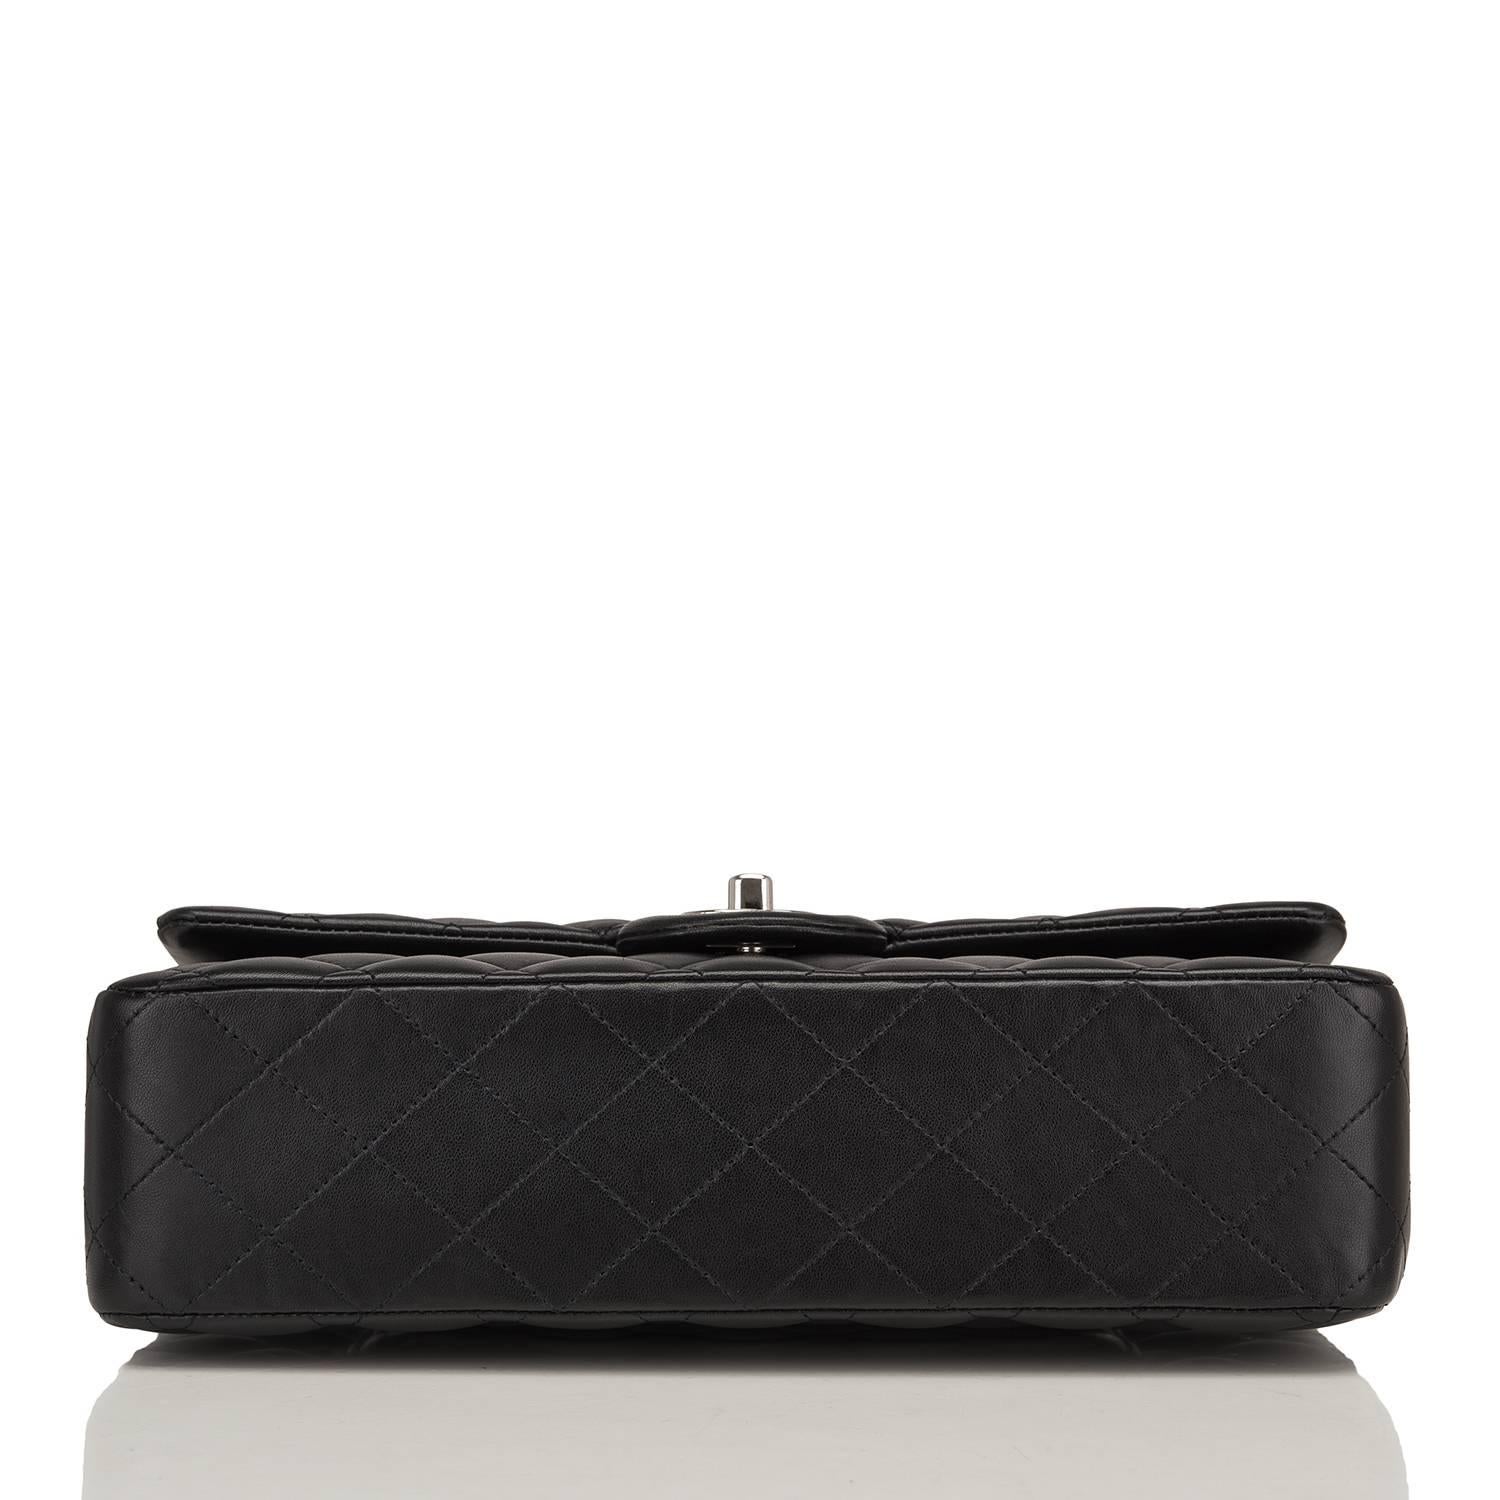 Chanel Black Quilted Lambskin Medium Classic Double Flap Bag 1